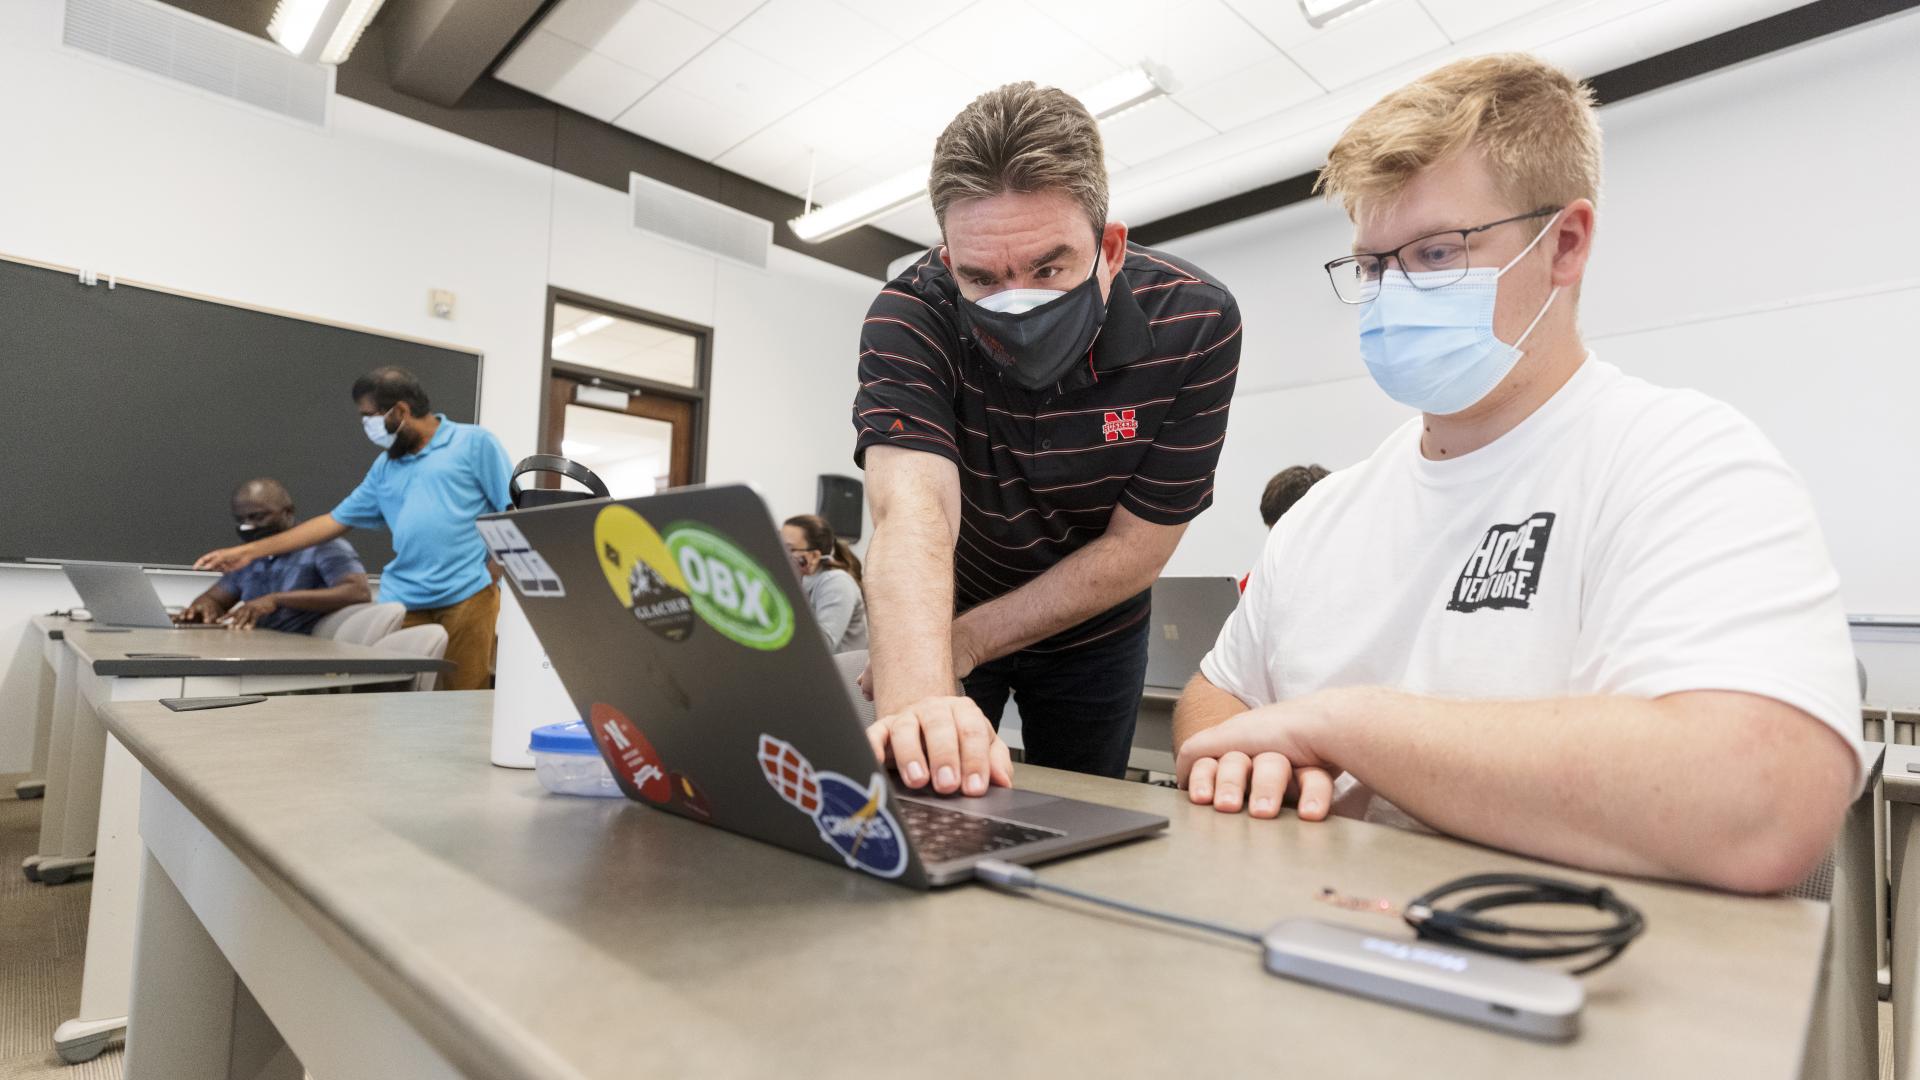 Detweiler's drone research lab applies cutting edge computing research in the real world.